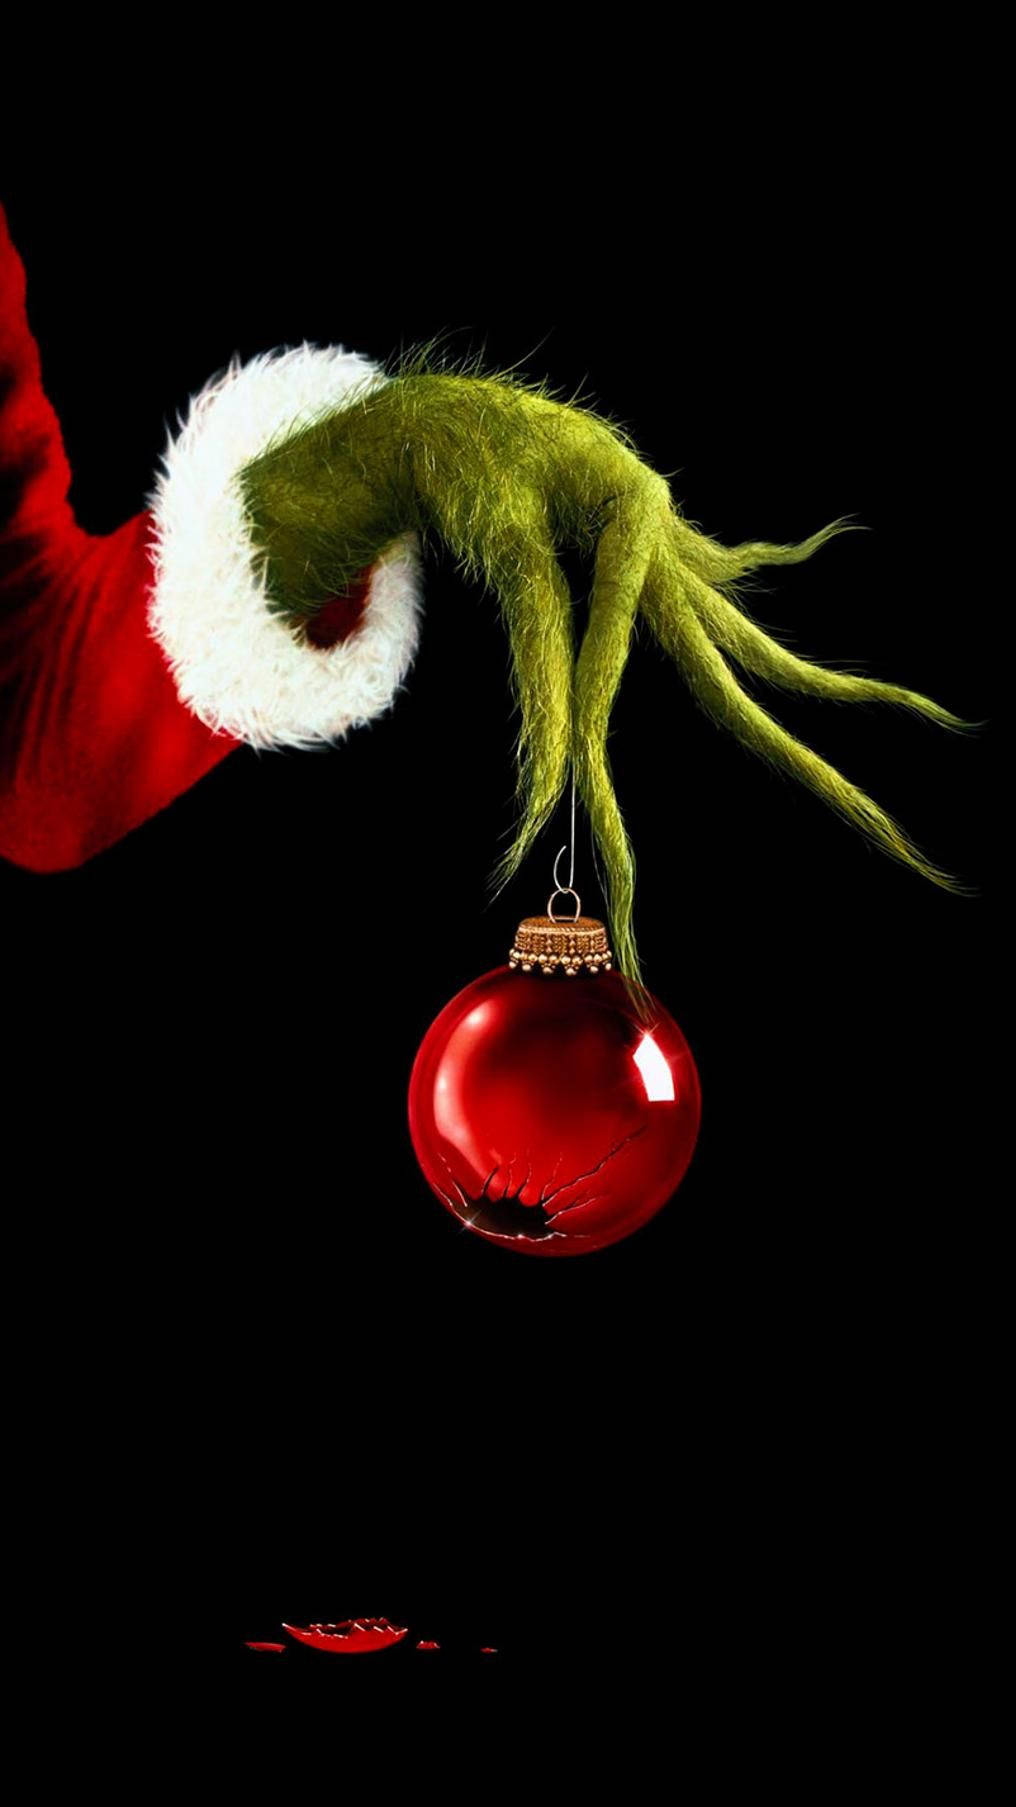 Caption: The Grinch Holding a Christmas Ball - Disney Christmas Theme for iPhone Wallpaper